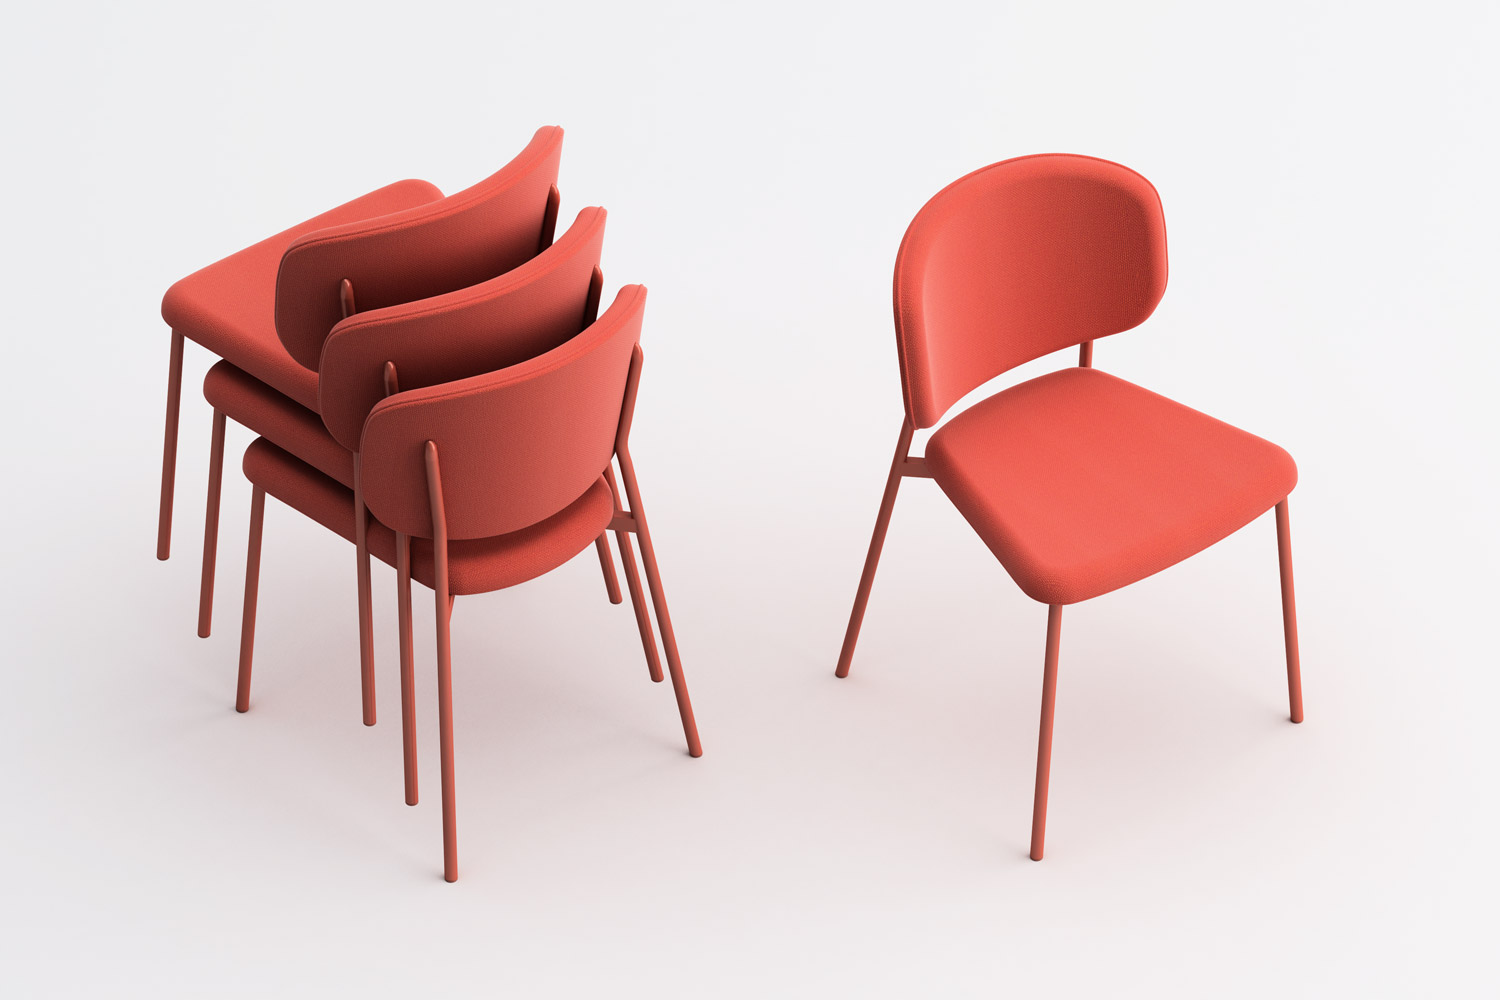 Wround stackable chair, sedia impilabile